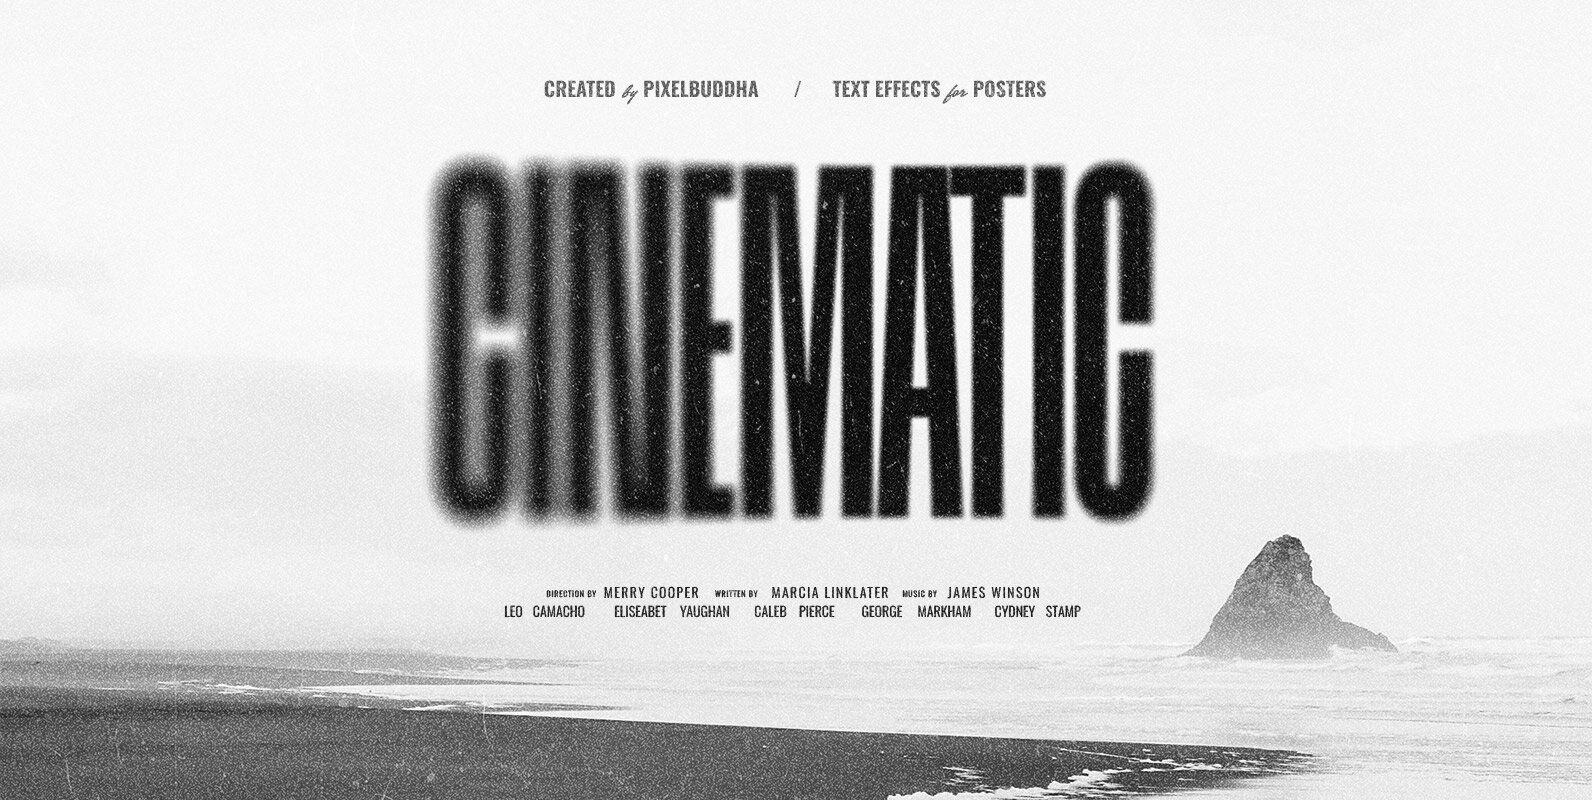 Cinematic Text Effects